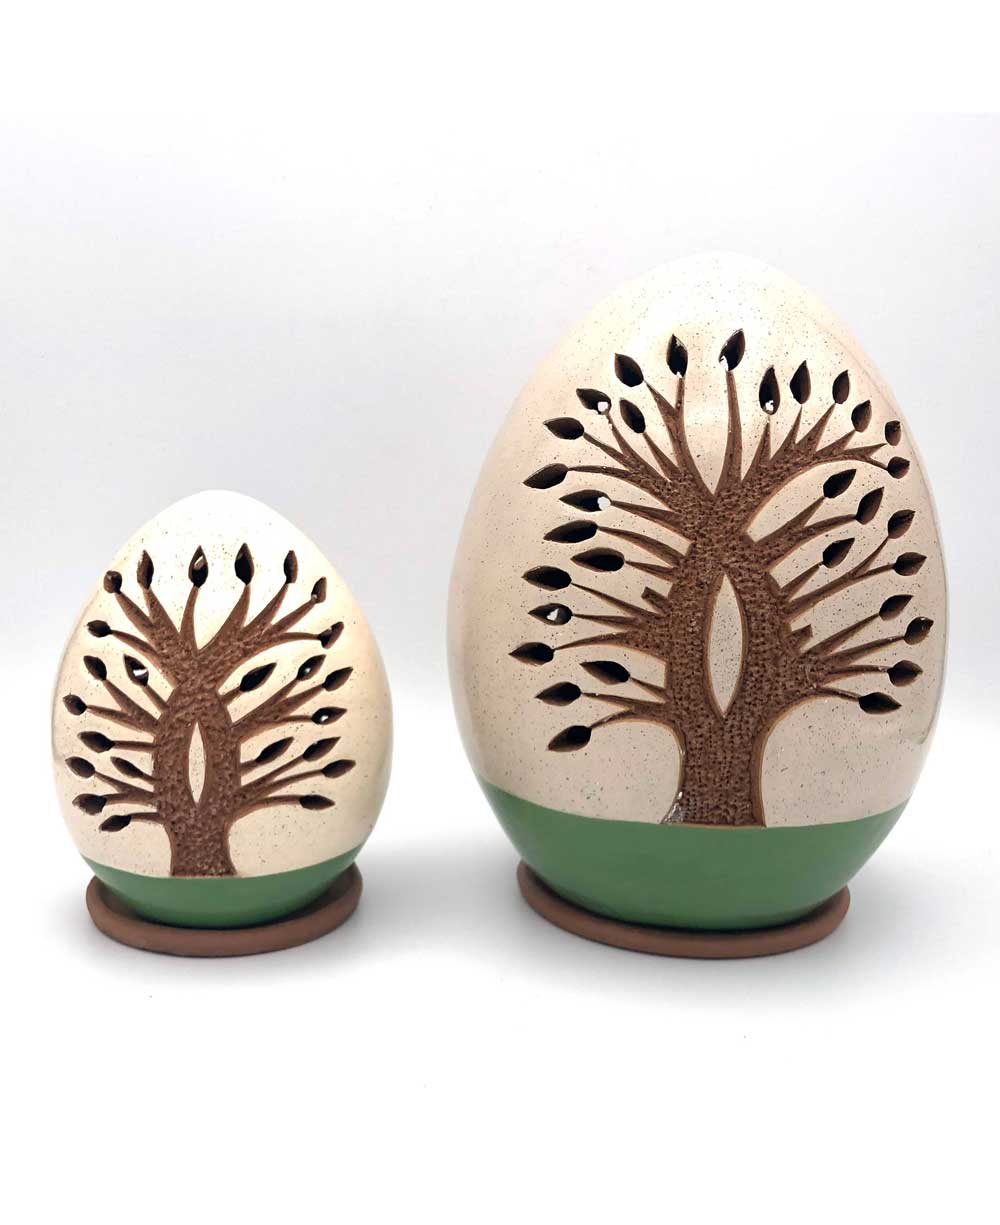 Handcrafted Tree of Life Ceramic Luminary / Tea Light Holder Size: Small - Lamps Small